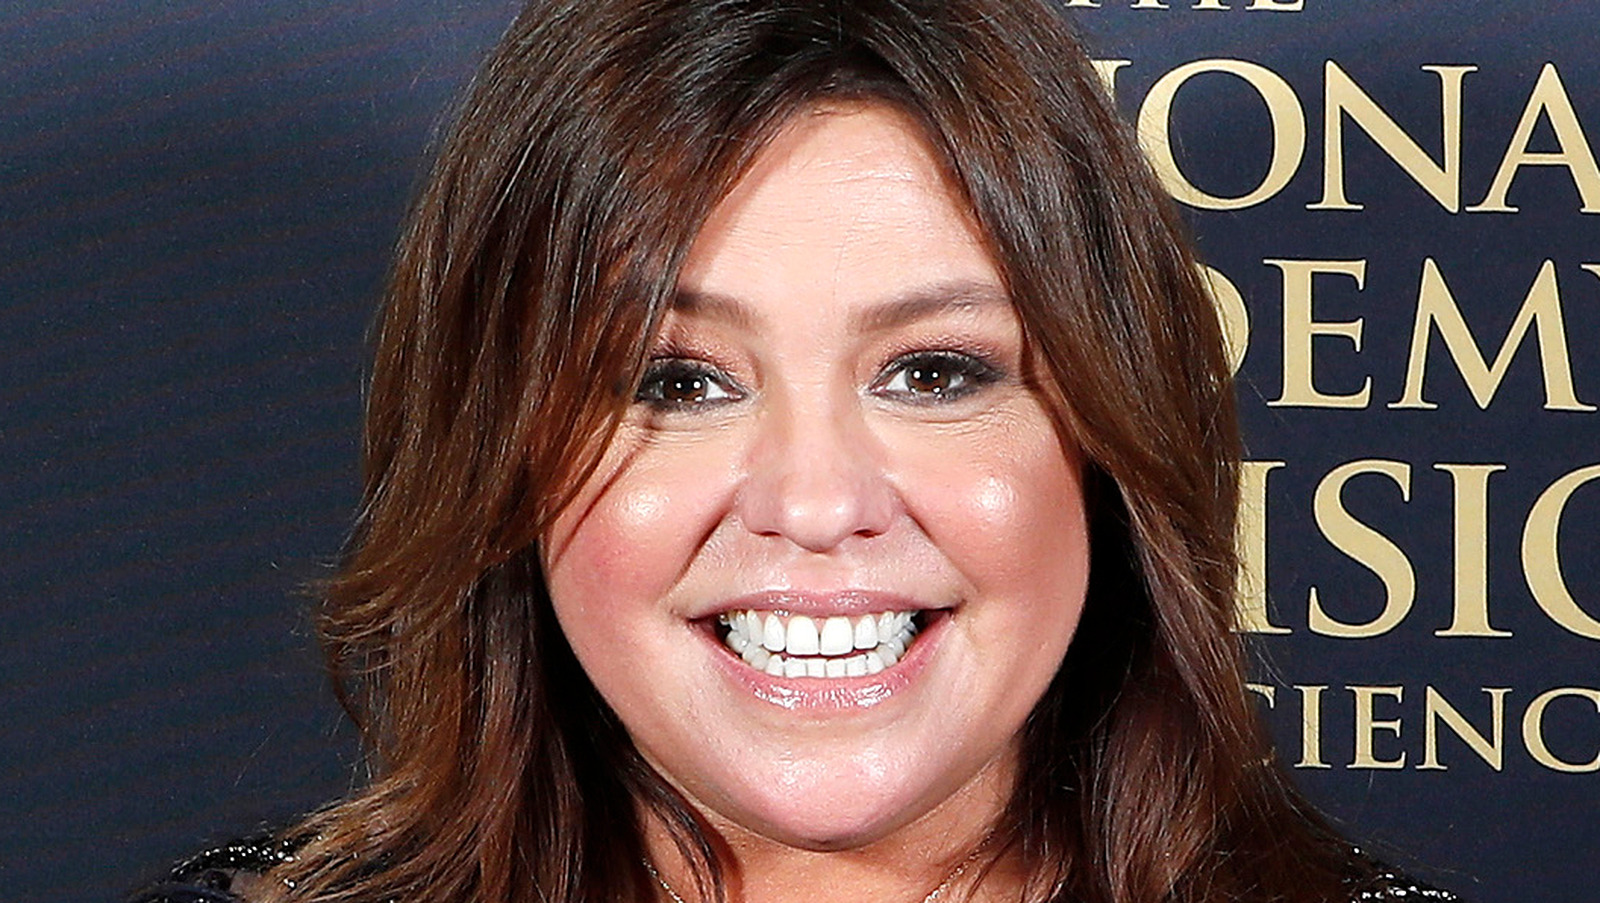 Rachael Ray Just Created Another Food Crime With Her Pizza-Flavored Chili